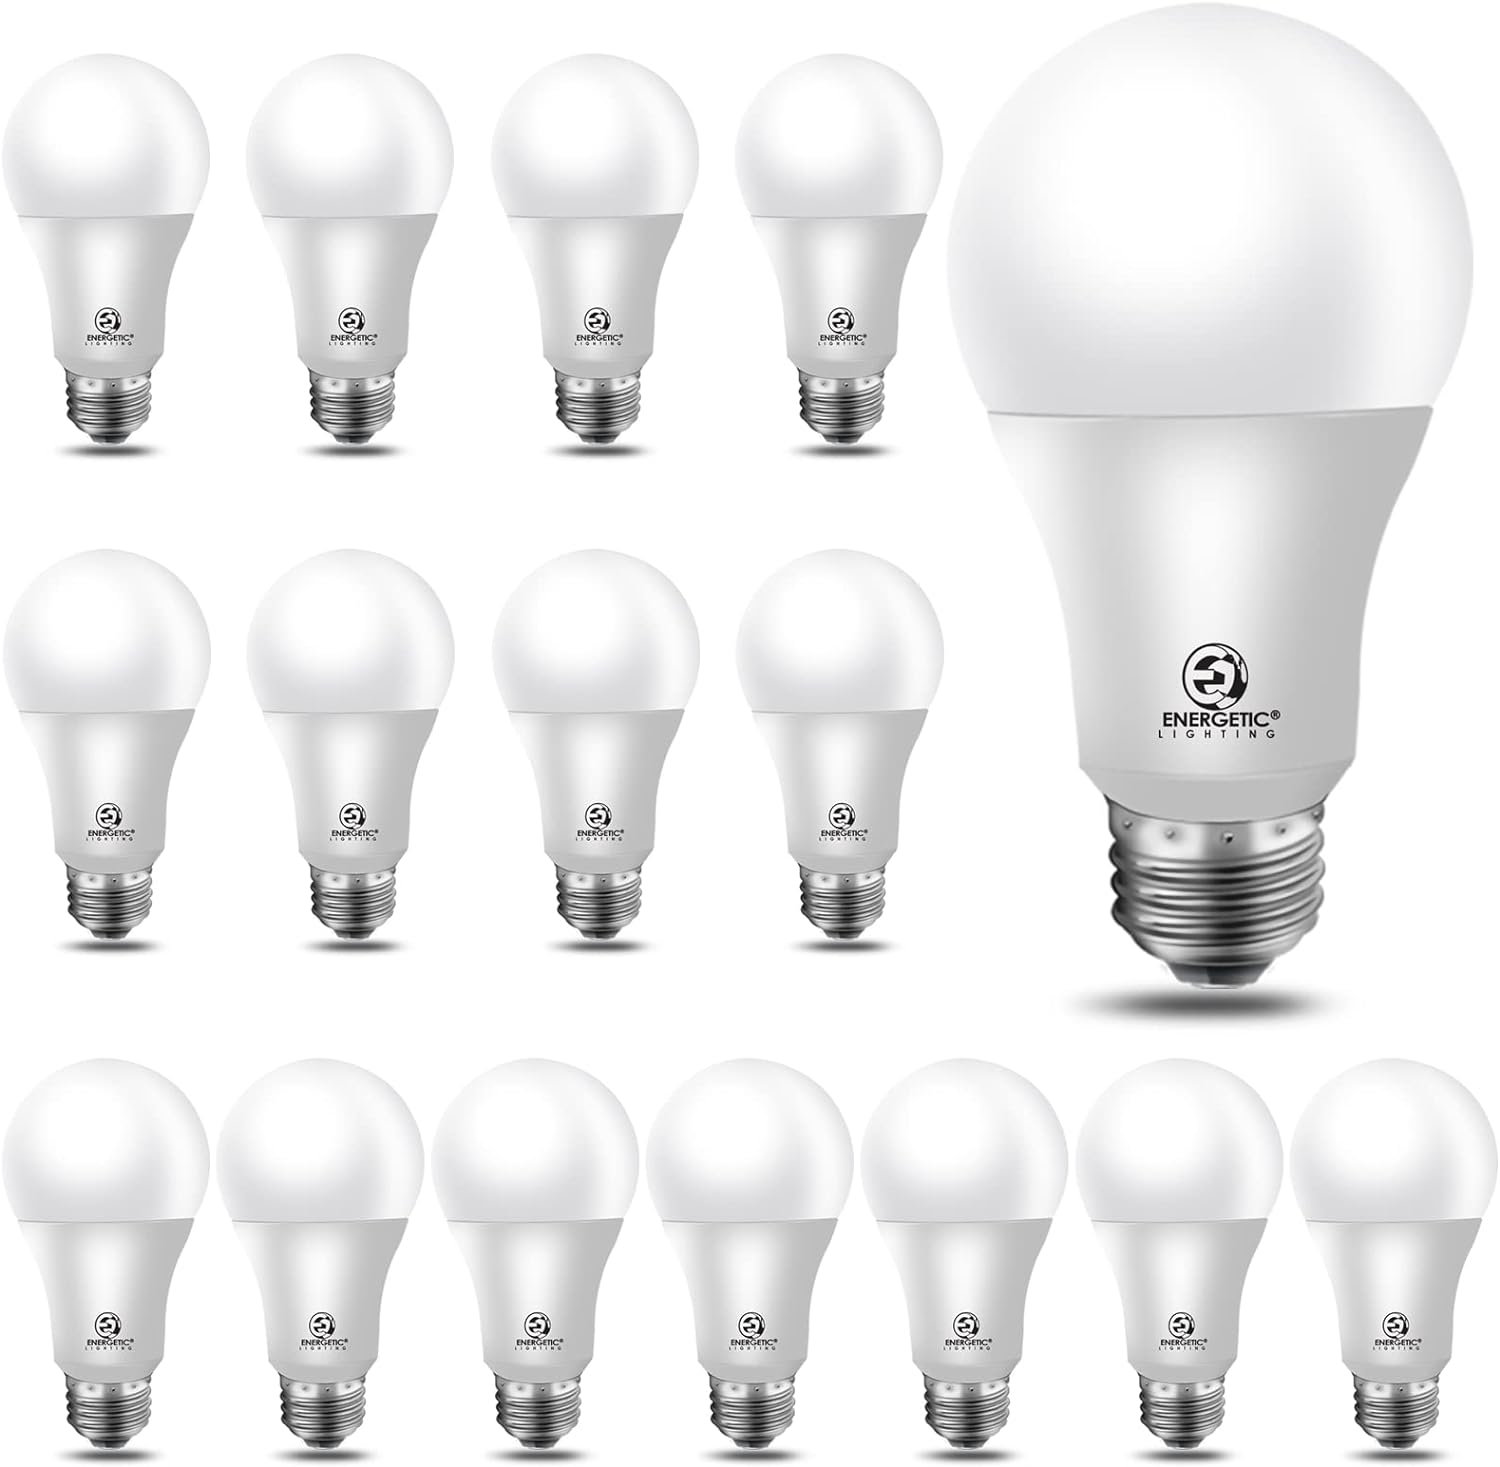 Energetic A19 LED Light Bulb Review